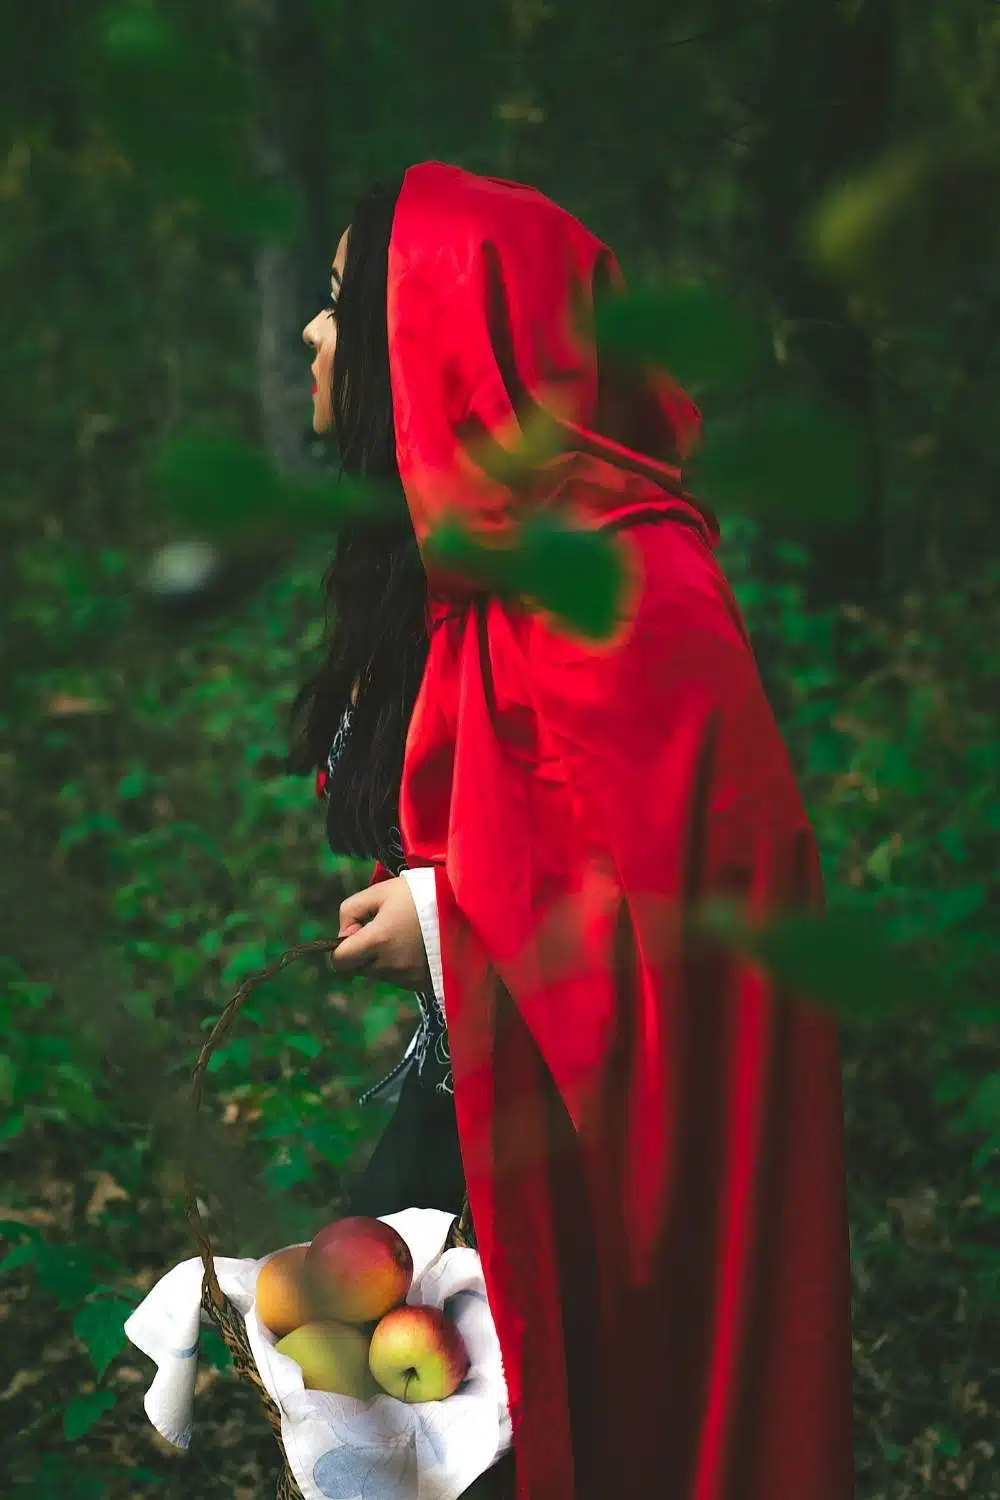 Woman wears red cape and carries a basket of apples, as a DIY Halloween costume.